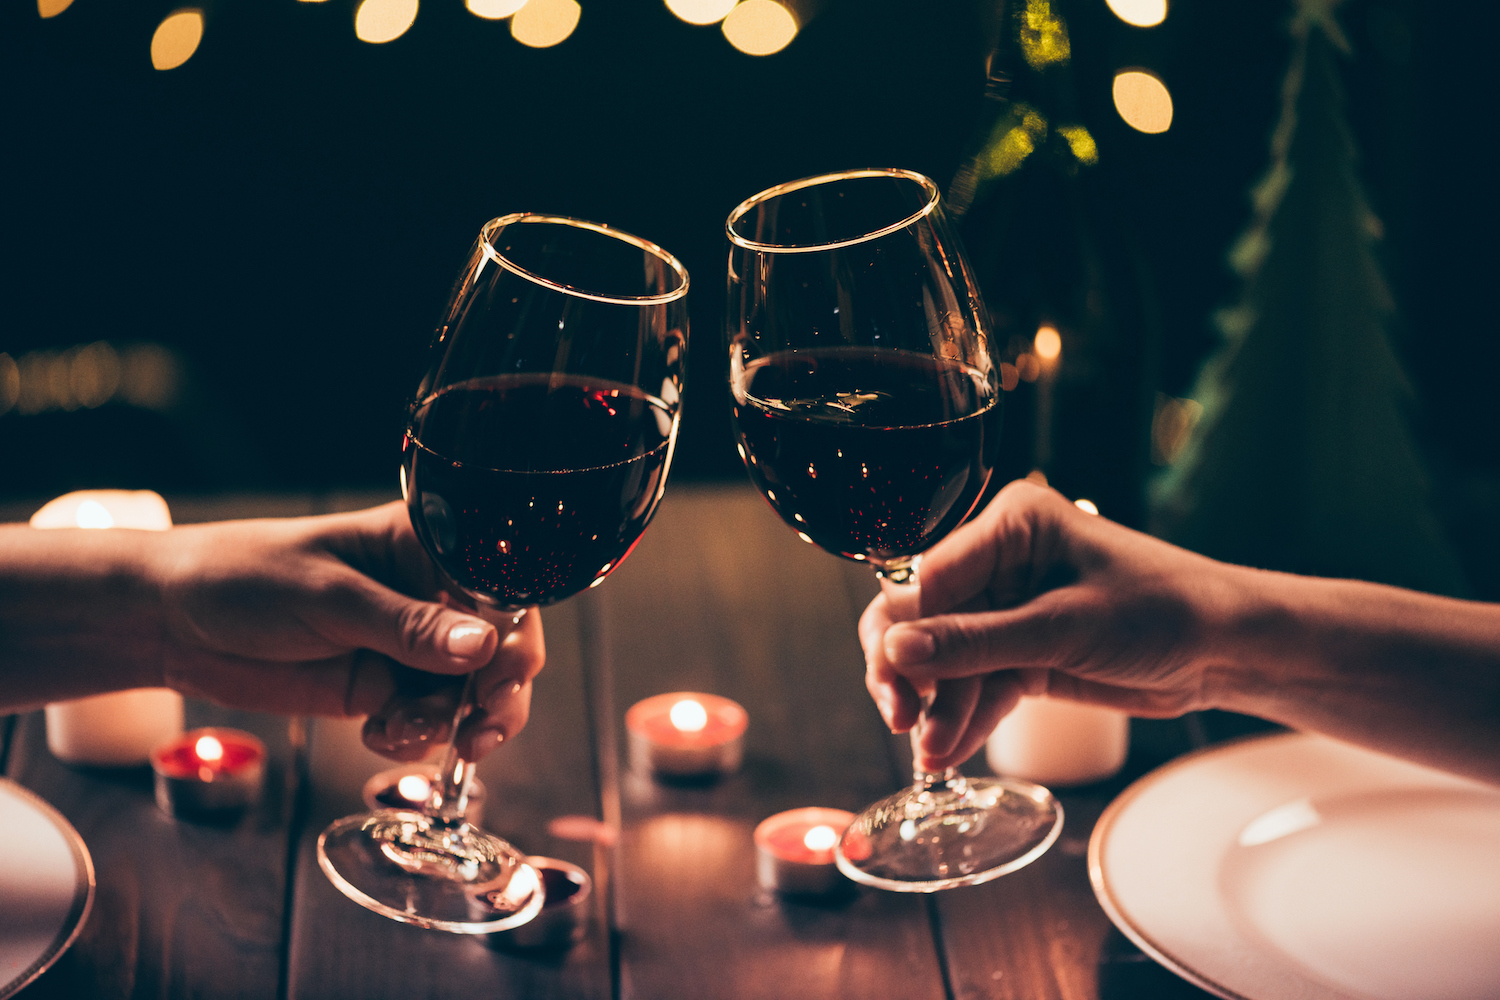 Cropped shot of two women clinking glasses with wine over served table with lit candles